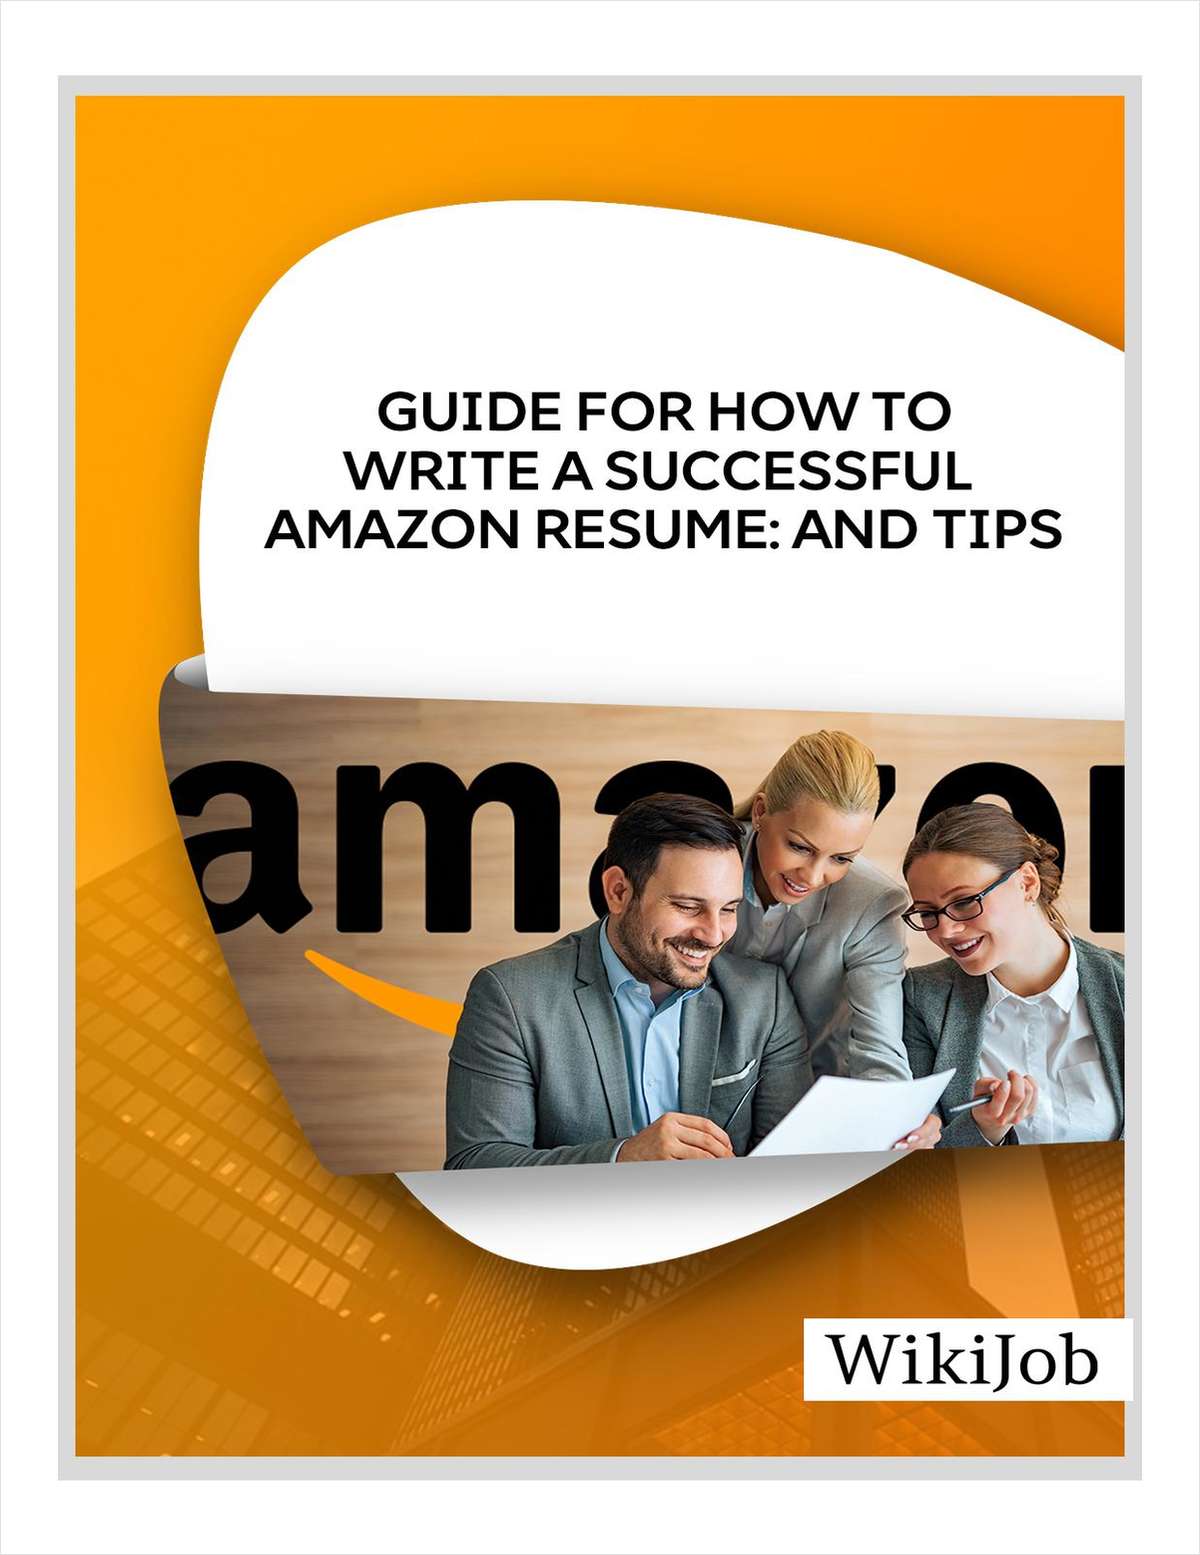 Guide for How to Write a Successful Amazon Resume: and Tips